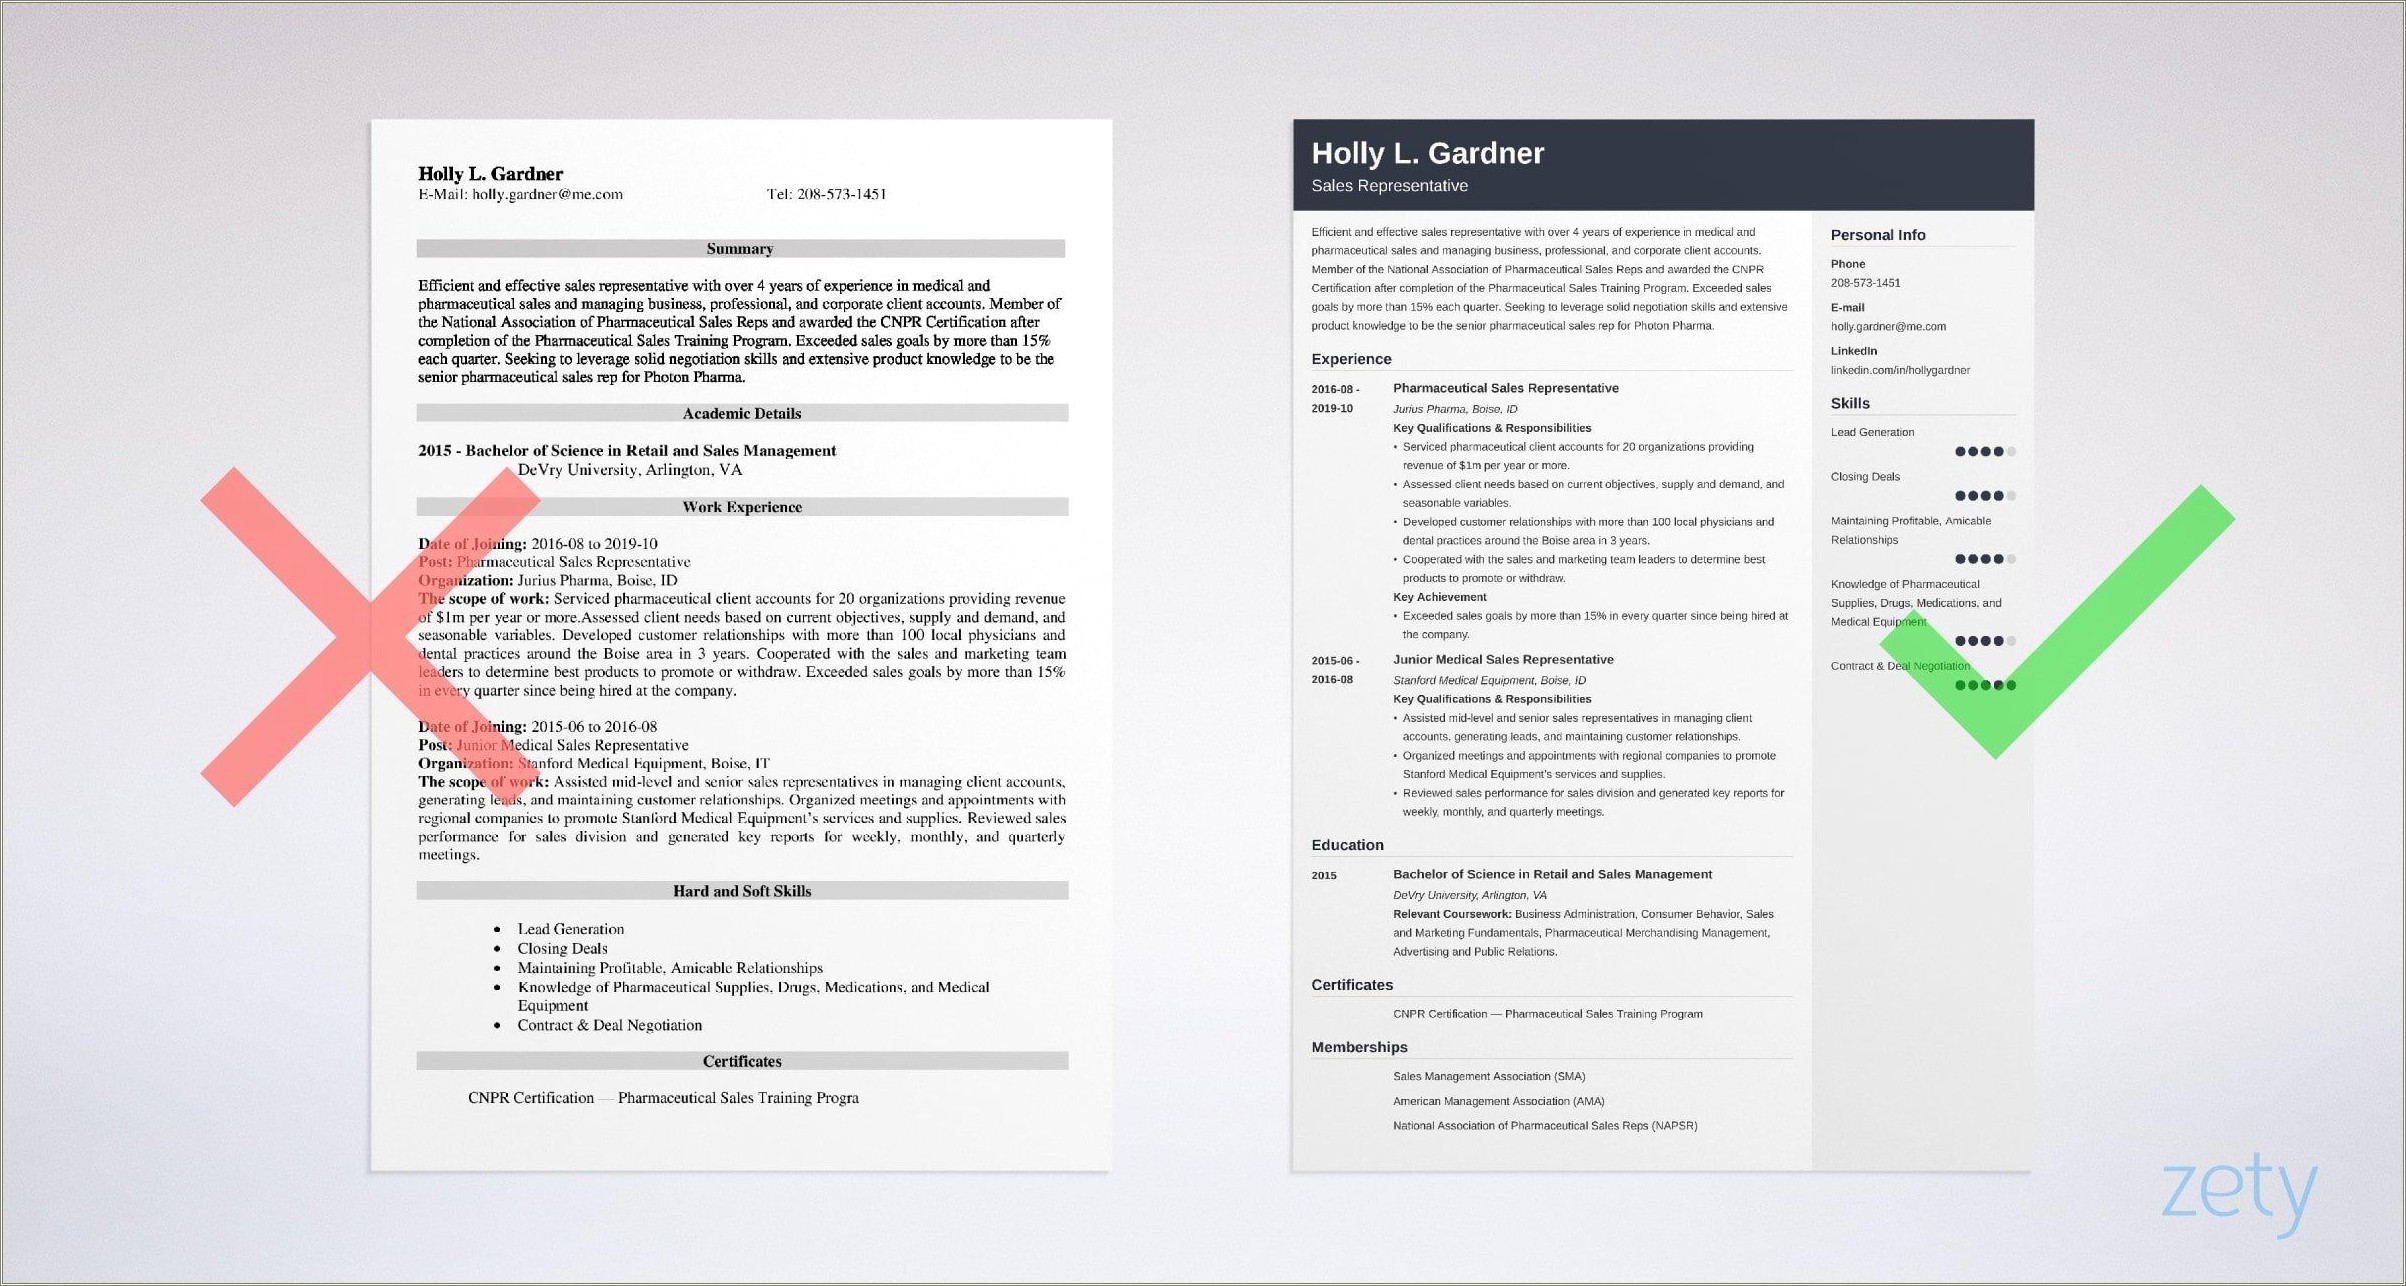 Business To Business Sales Resume Sample